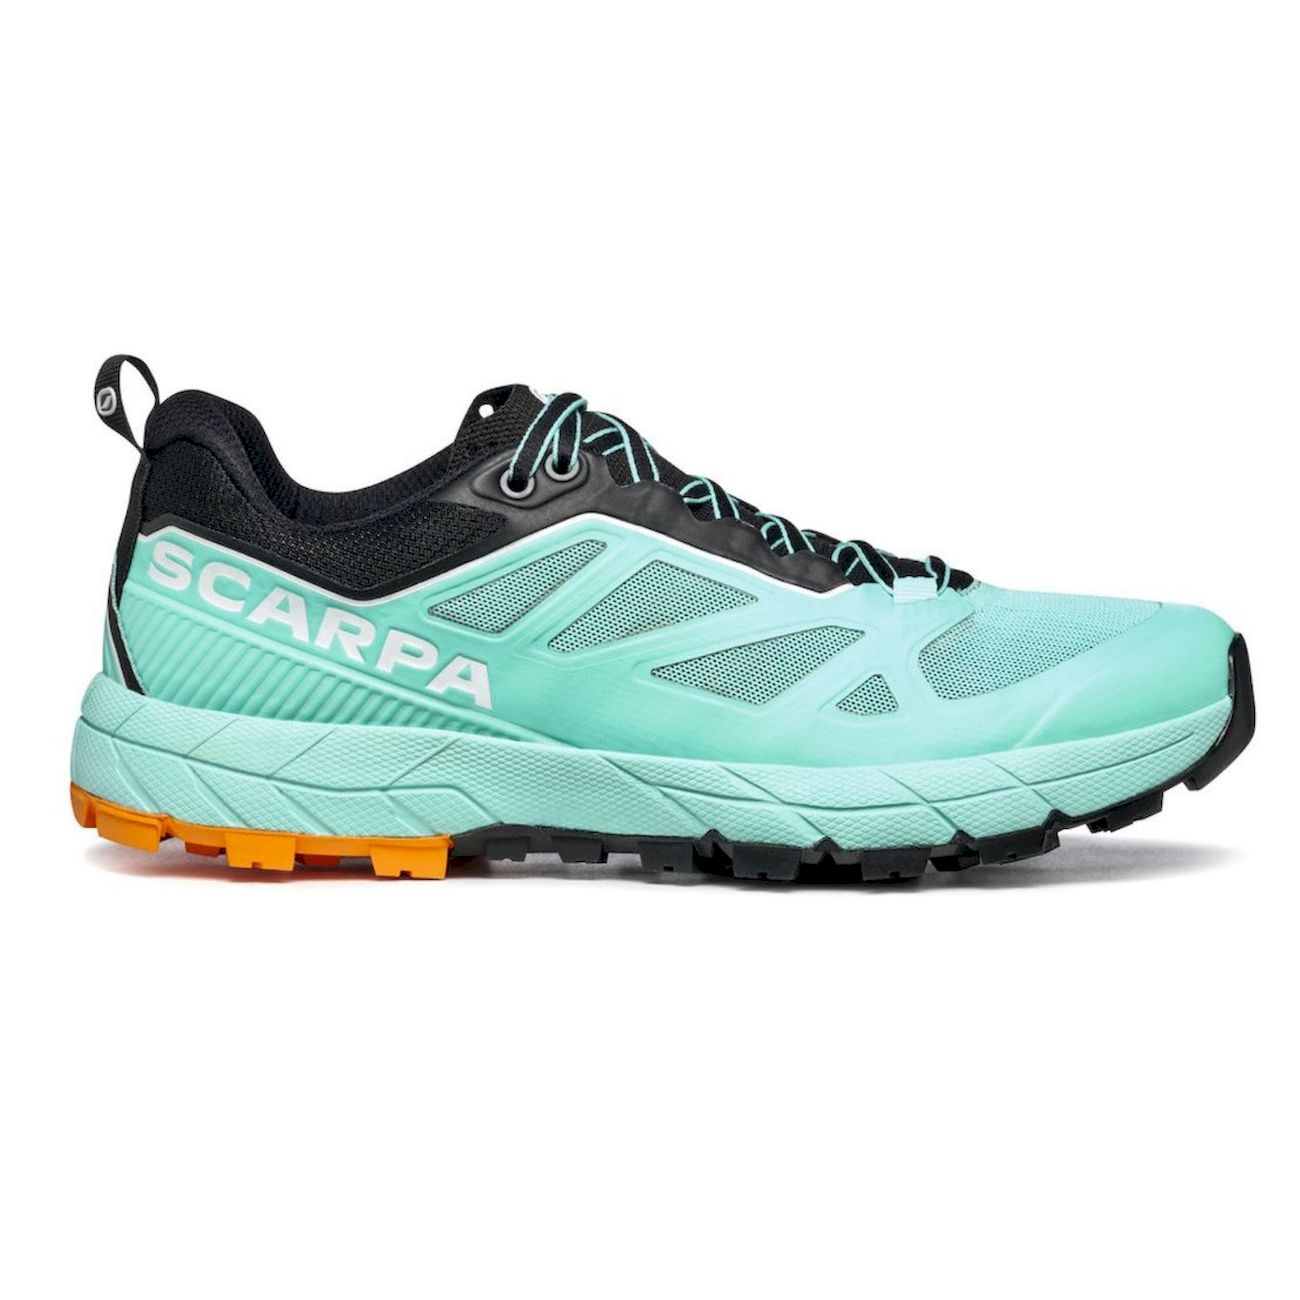 Scarpa Rapid Wmn - Chaussures approche femme